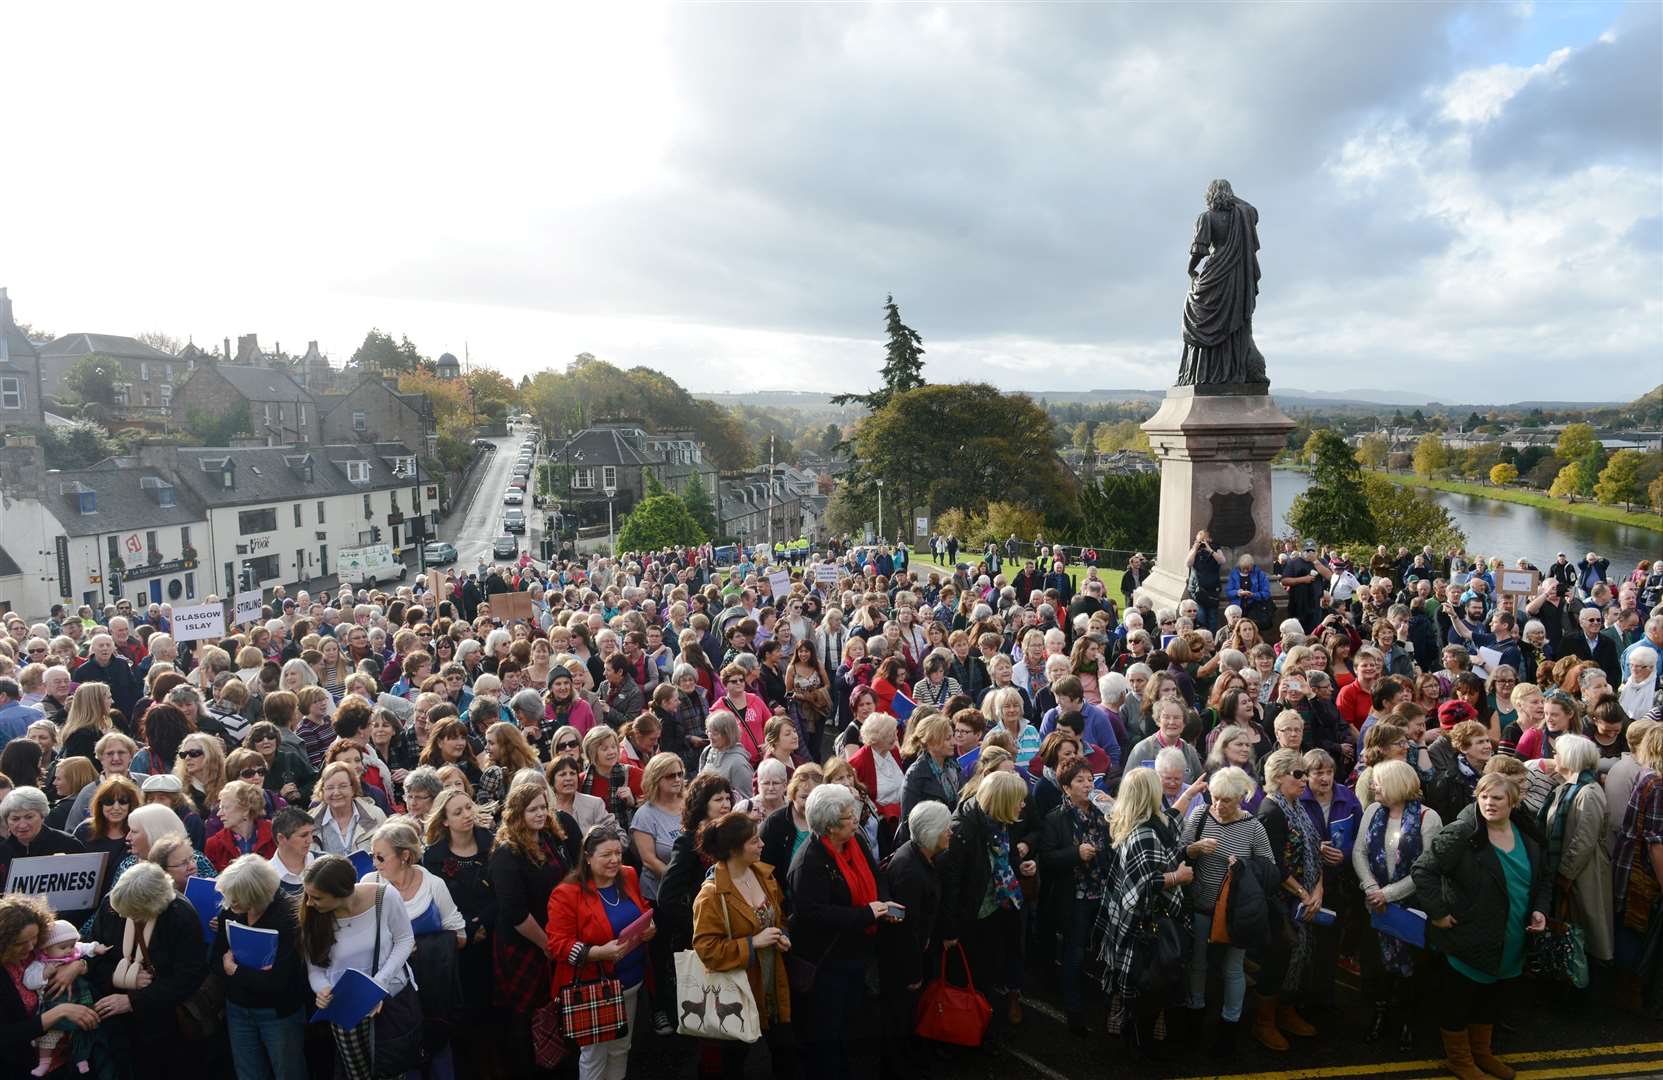 The crowds in front of Inverness Castle. The massed choirs of the Royal National Mod 2014, the last time the event was held in Inverness.